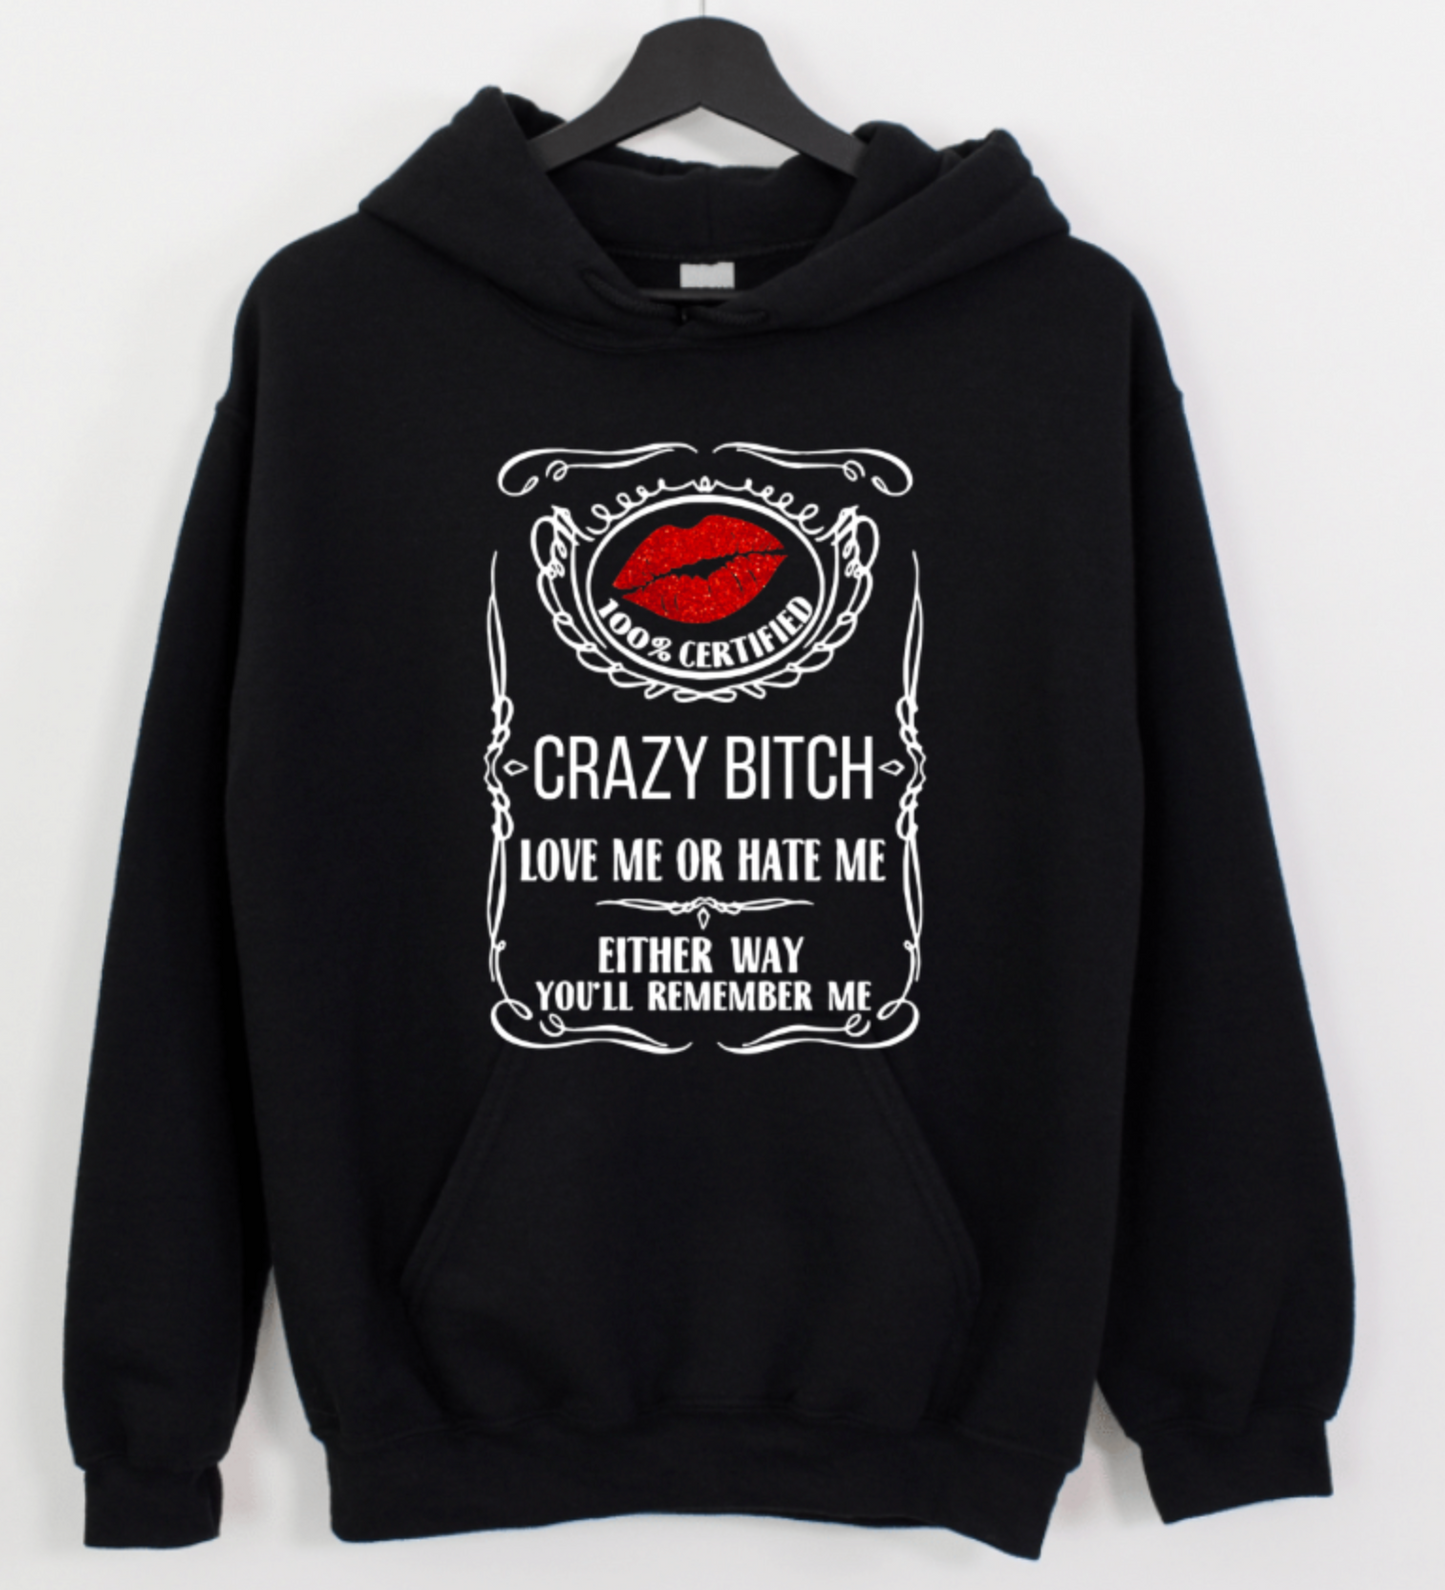 100% CERTIFIED CRAZY B**** LOVE ME OR HATE ME